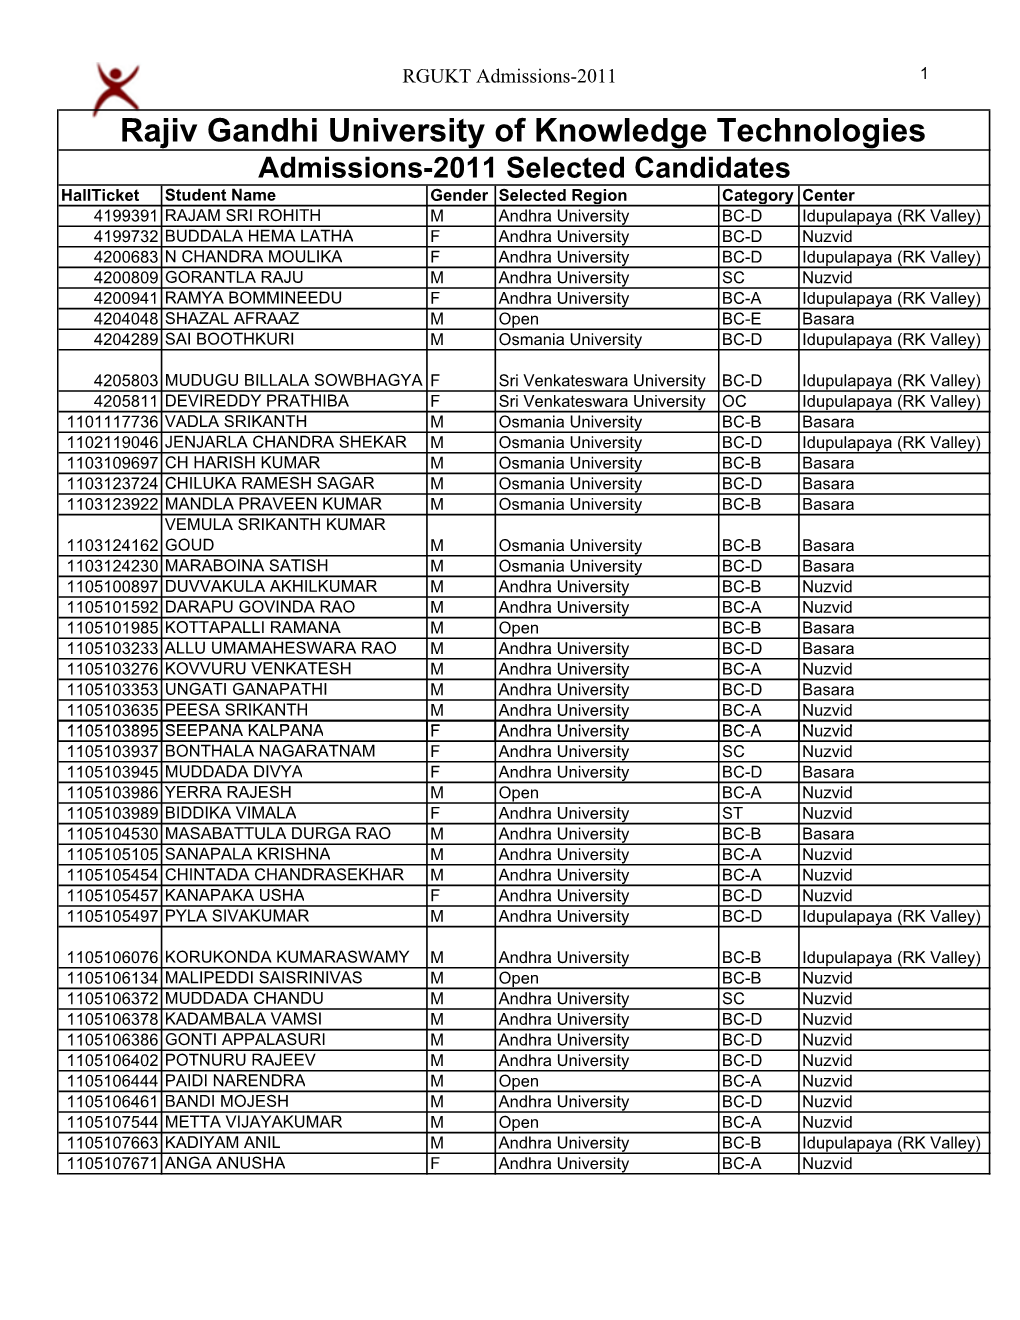 Admissions 2011 Selected Candidates